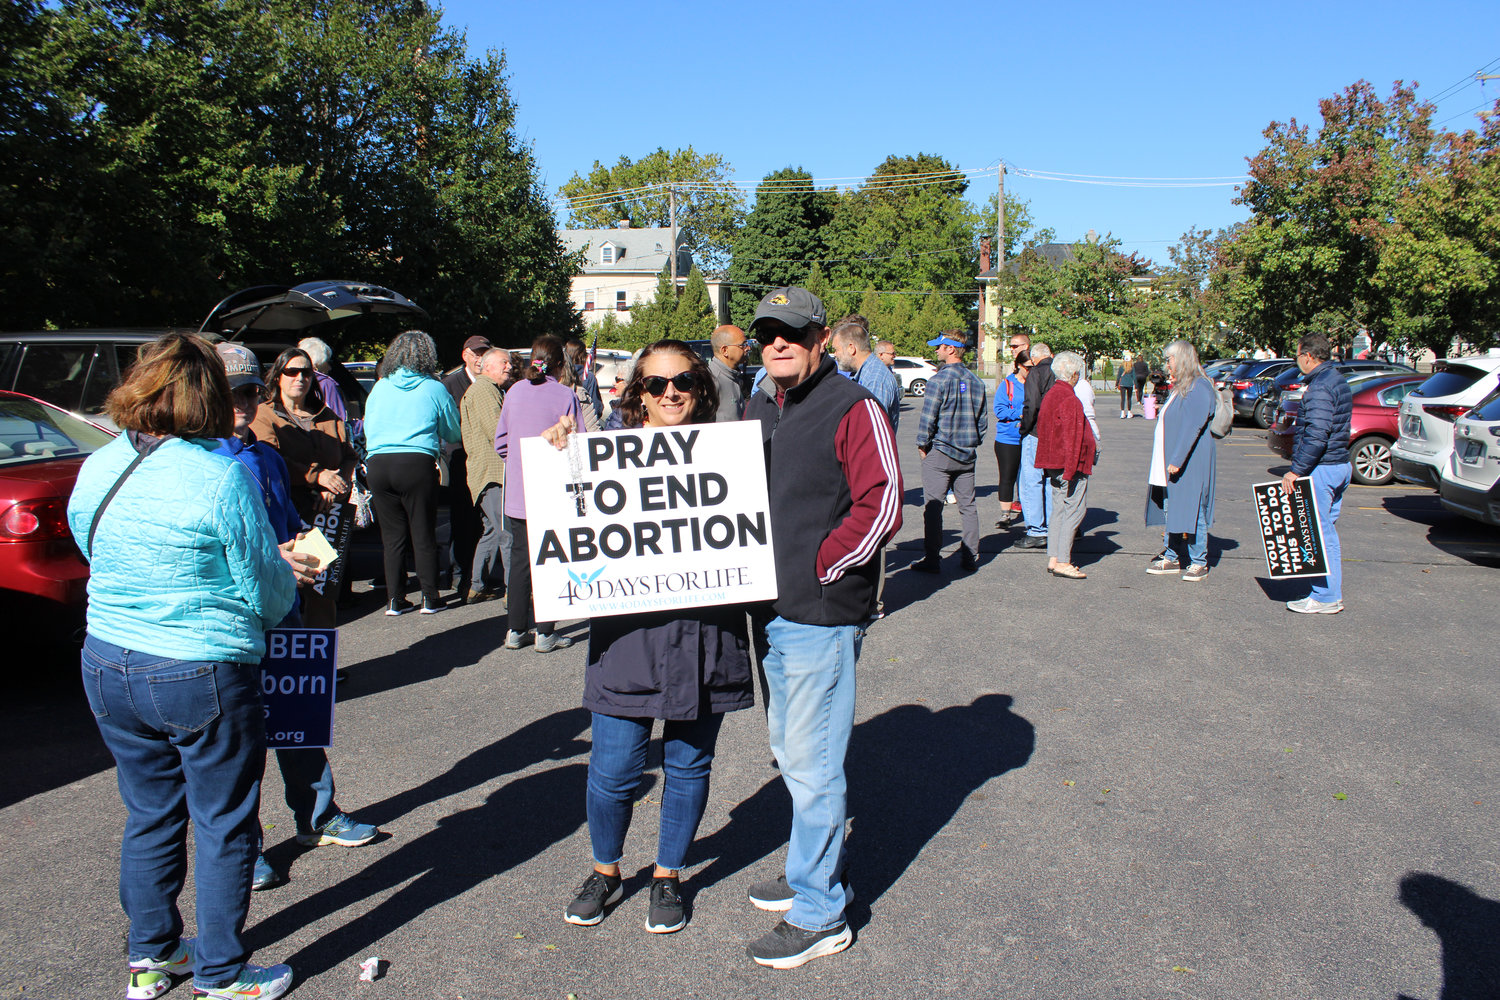 Many Rhode Islanders took part in a Jericho Walk for Life, a peaceful, respectful procession in Providence to pray for an end to abortion.